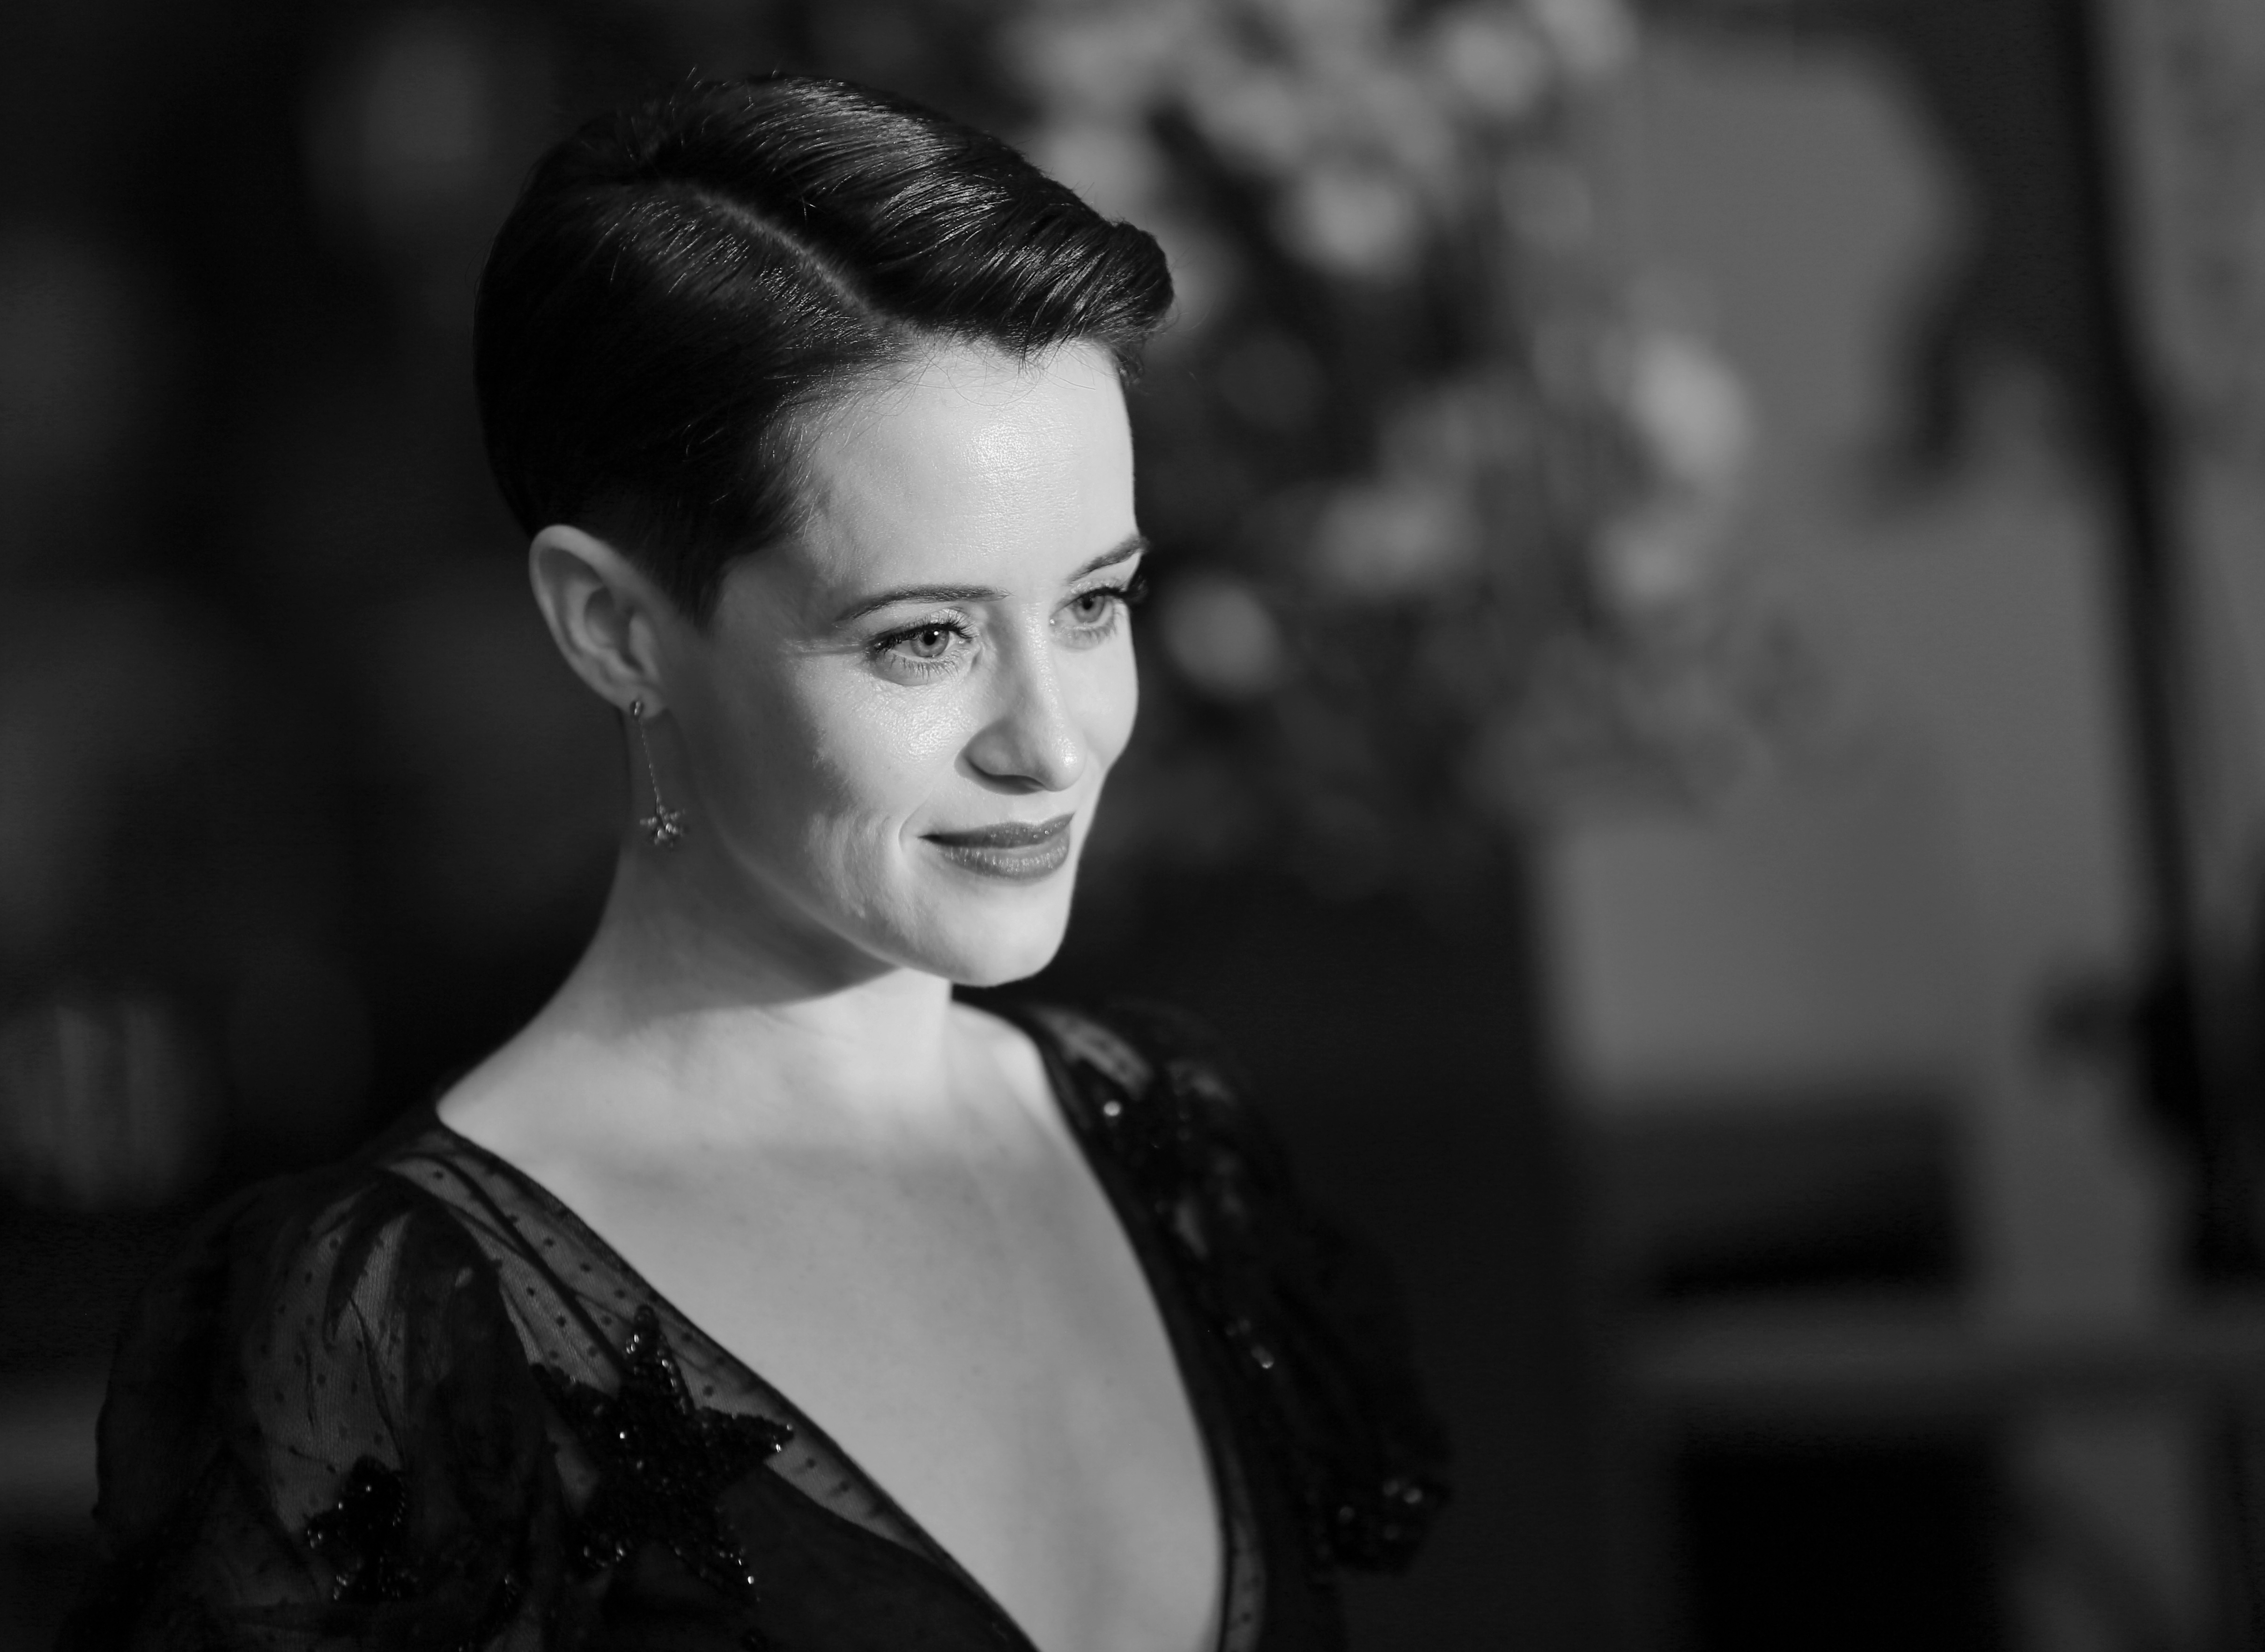 Elegance in monochrome: a woman with a stylish updo hairstyle and a radiant smile, adorned in an embellished dress, glances away from the camera, embodying classic hollywood glamour.